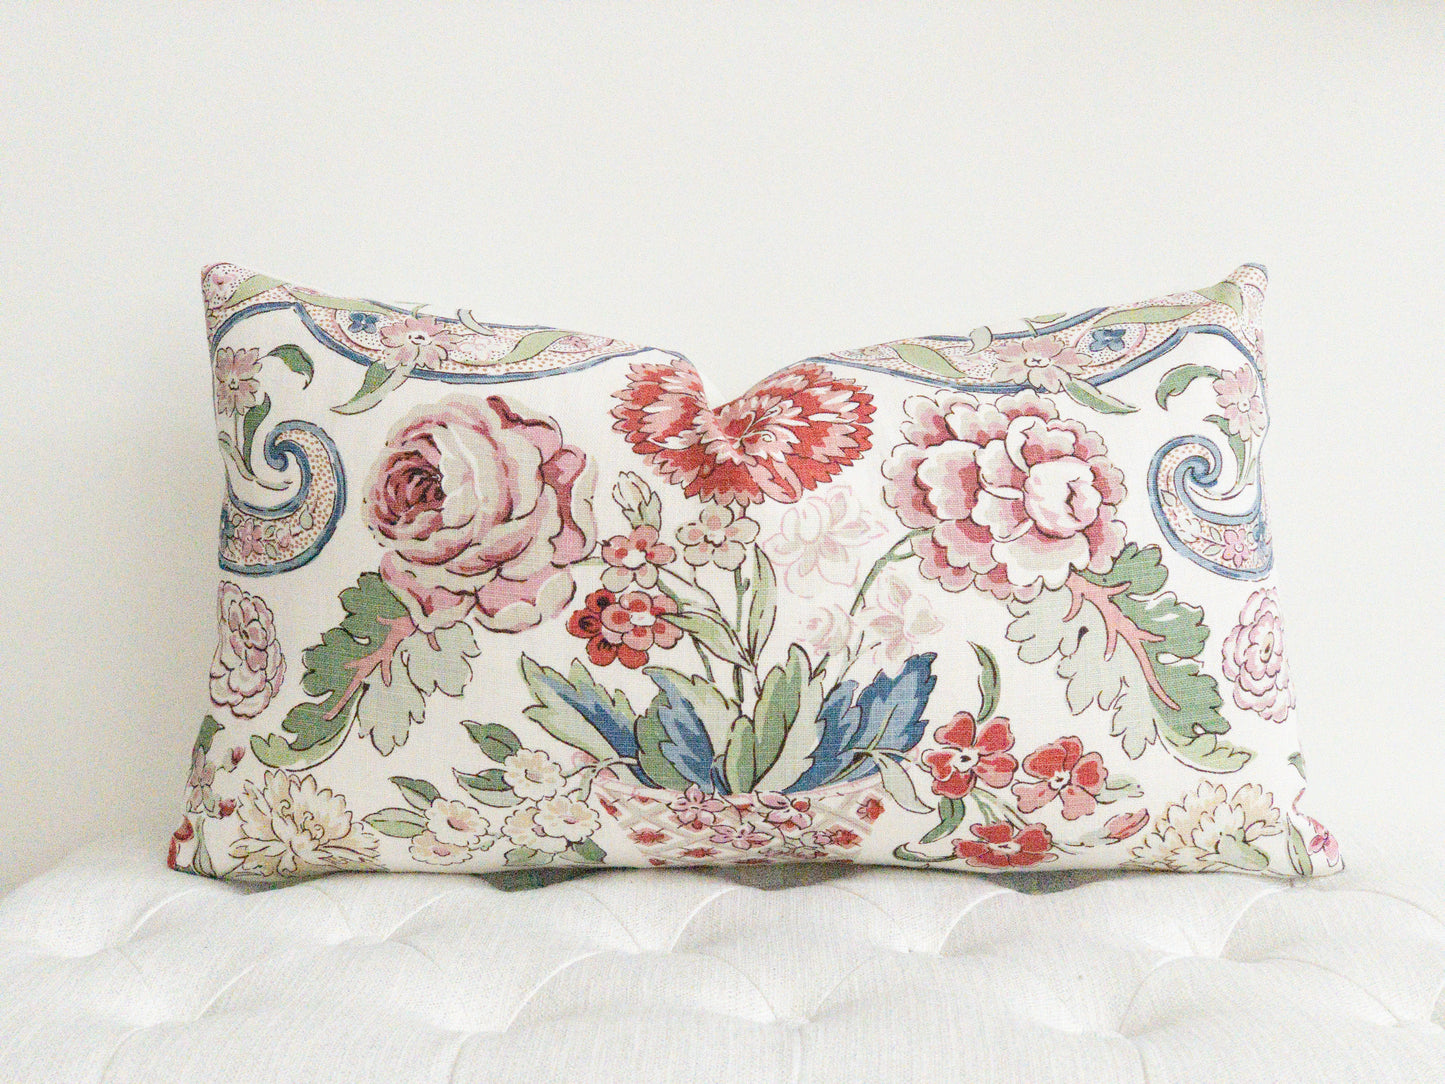 Multi color floral designer lumbar pillow.  Reds, pinks , blues and greens on a white background. 